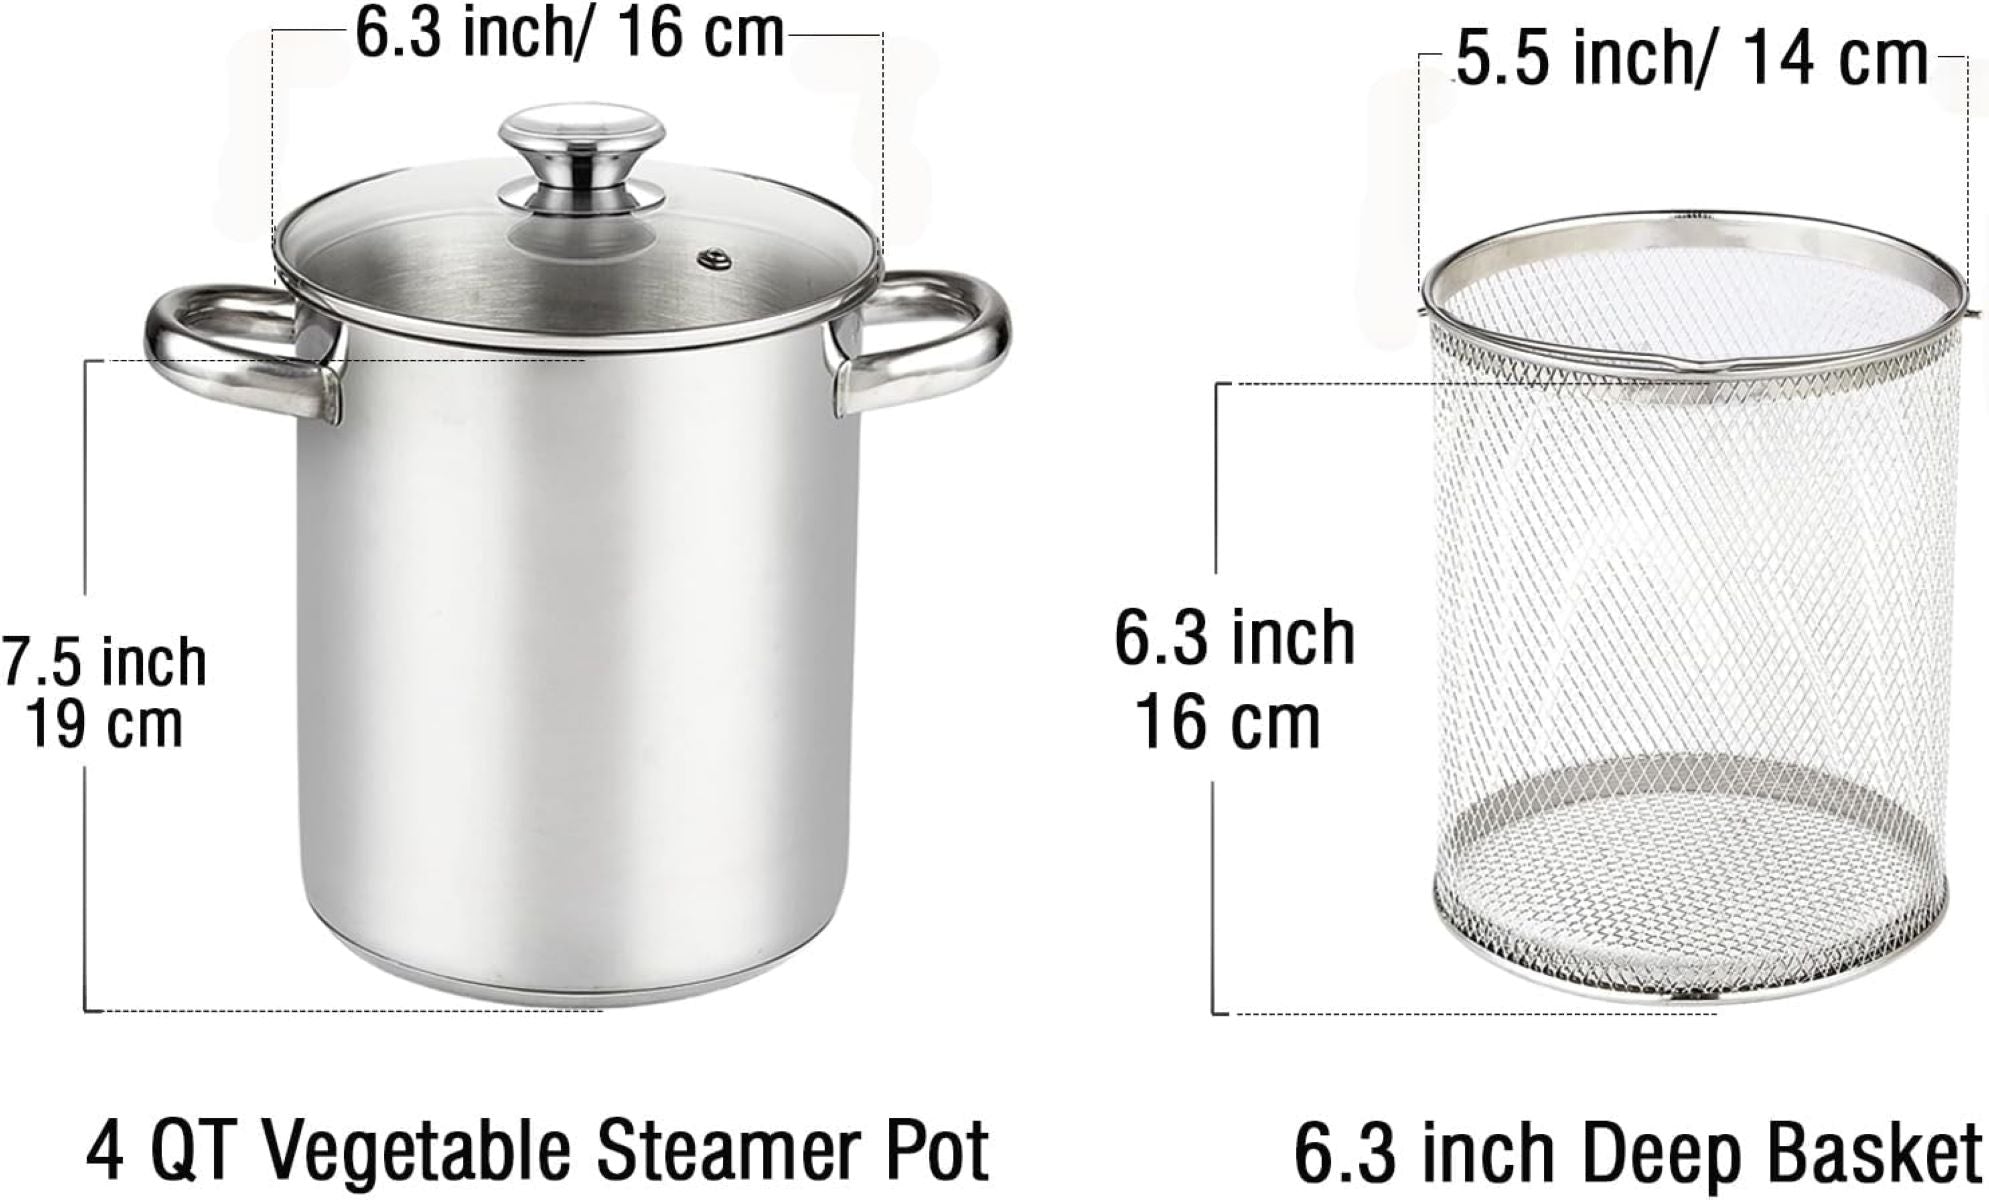 Cook N Home 5-Quart Stainless Steel Casserole Stockpot with Lid